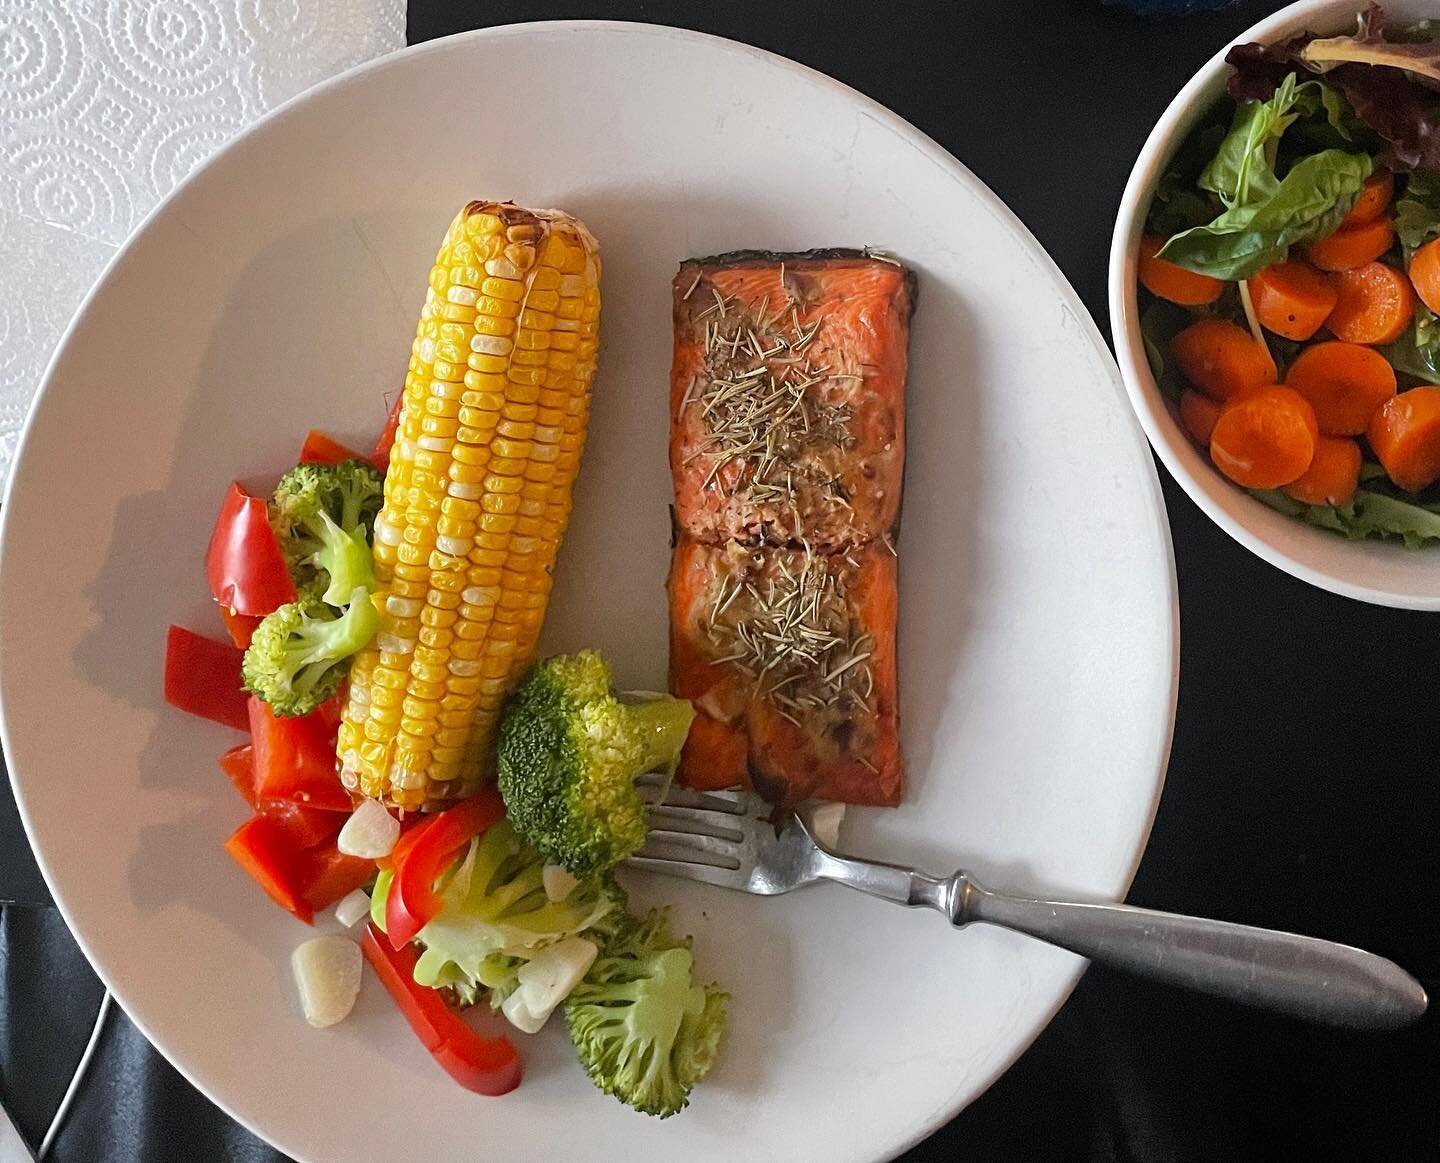 Yummy summer dinner! Roasted the salmon and corn in air fryer together and steamed the veggies.. easy peasy! 
.
.
.
. #summer #healthyeating #realfood #airfryer #pilateslife #yummyfood #actorlife #summerdinner #eathomemade